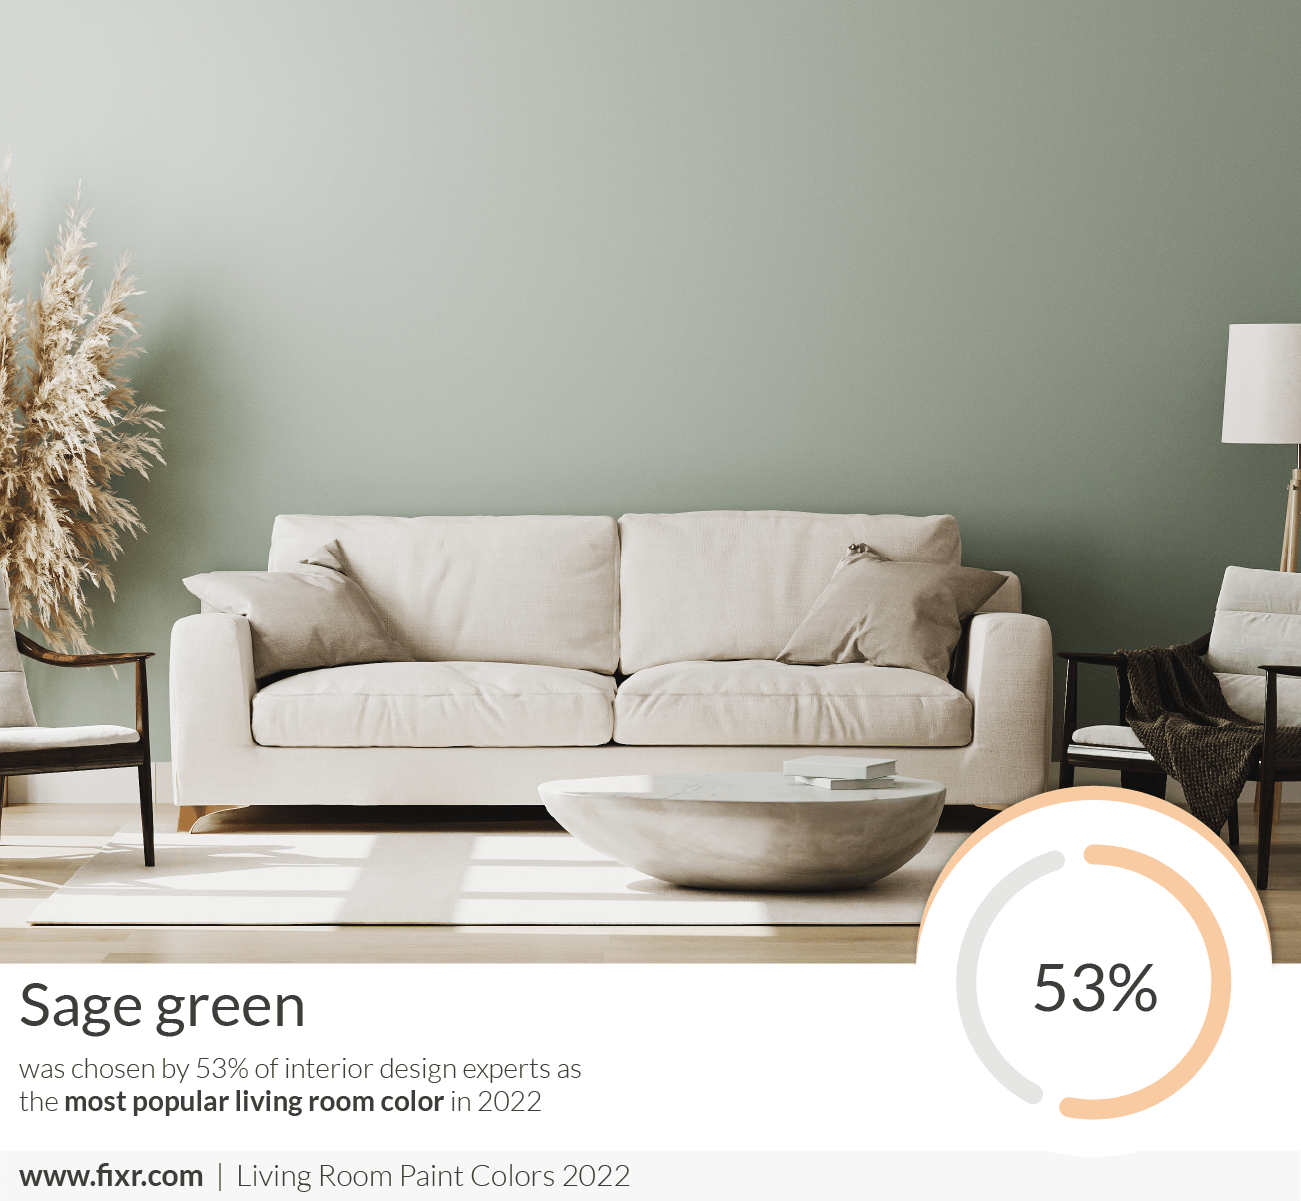 The Top 7 Choices For Living Room Paint Colors In 2022